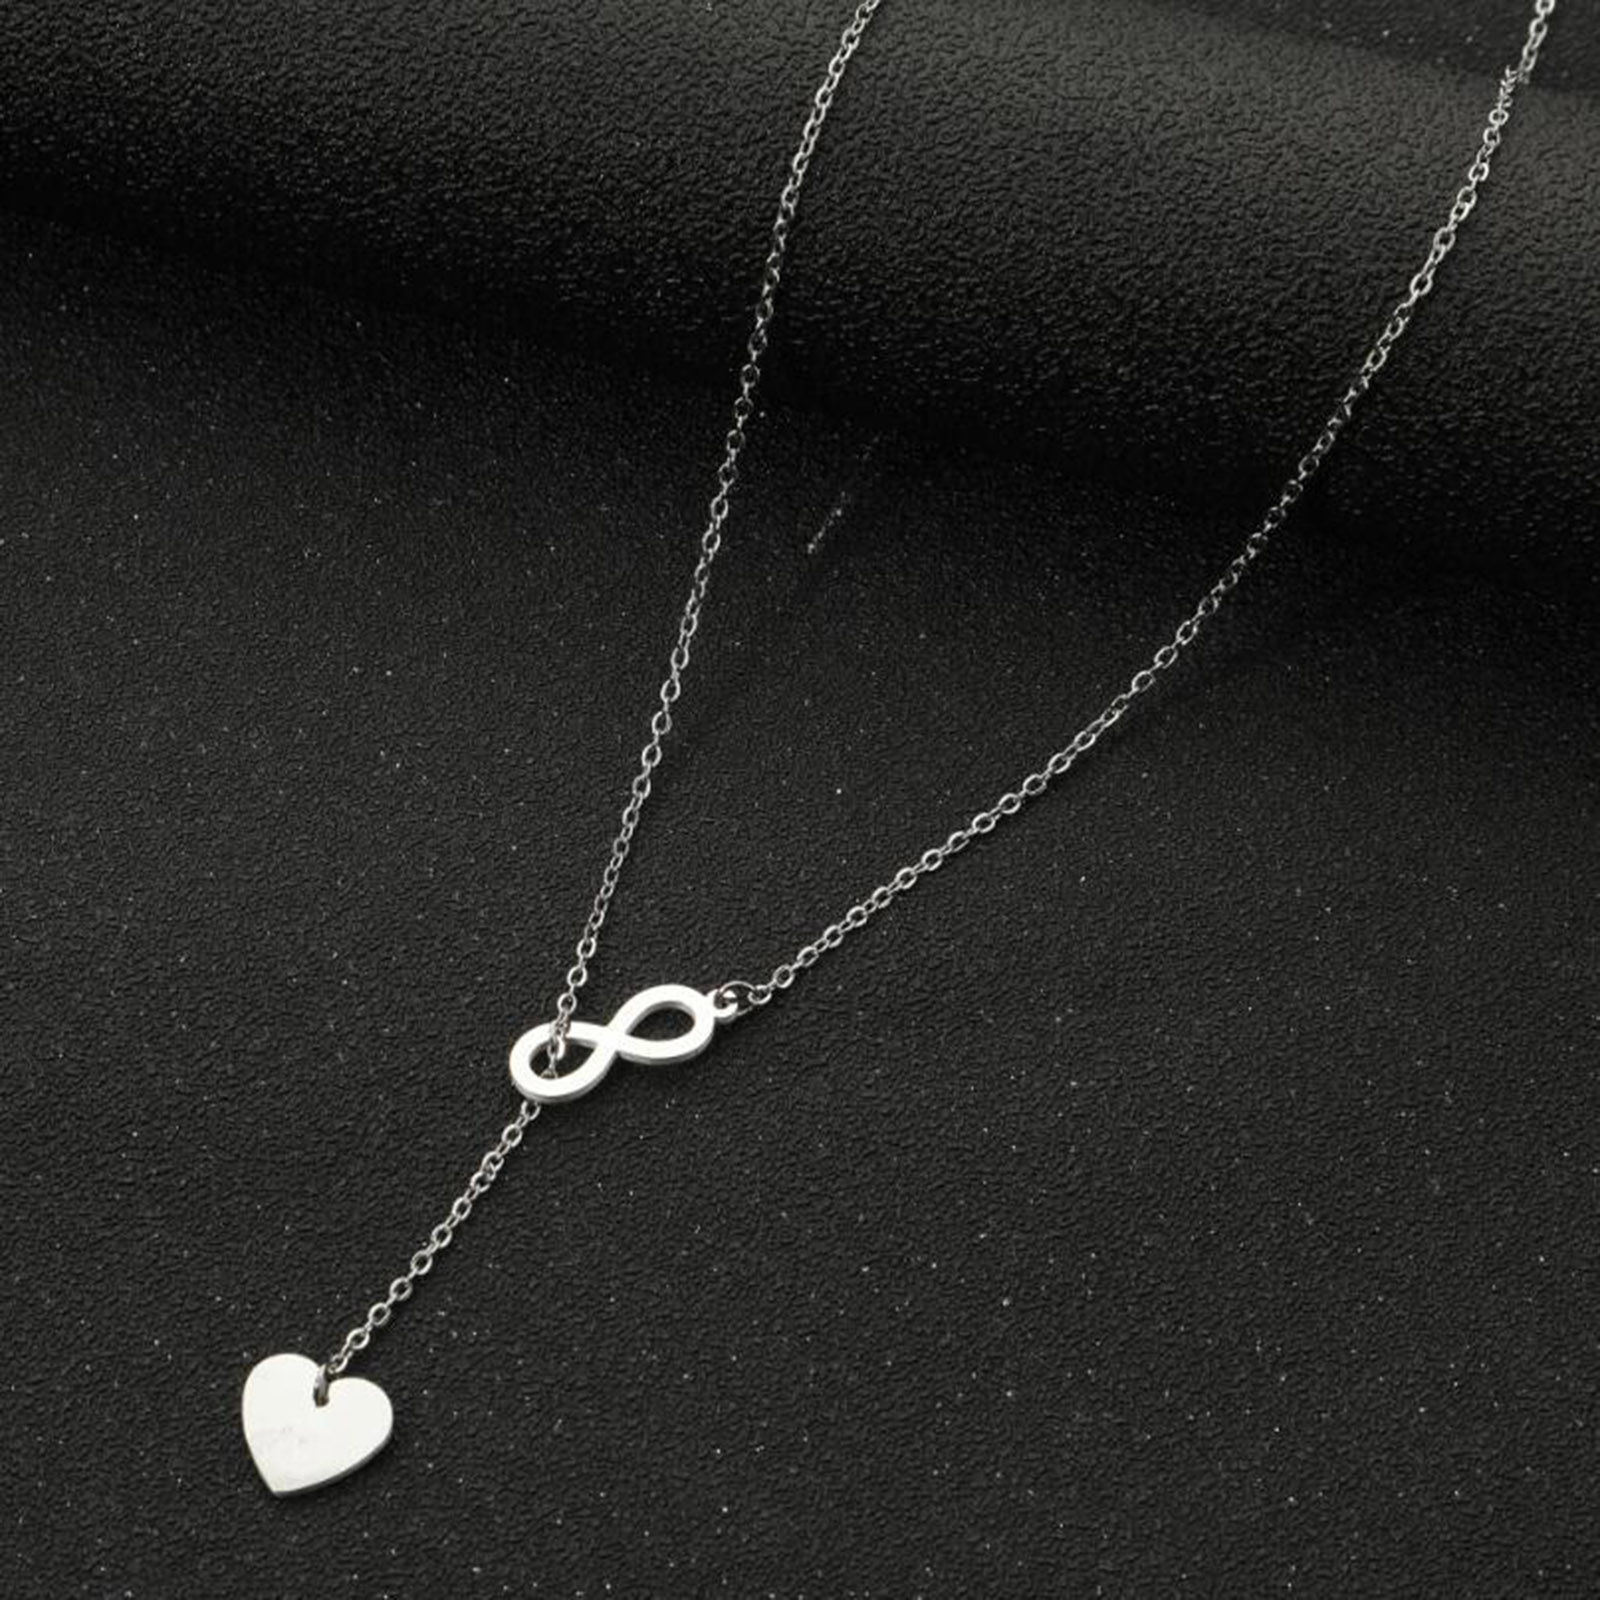 Picture of Titanium Steel Stylish Y Shaped Lariat Necklace Silver Tone Infinity Symbol Heart 45cm(17 6/8") long, 1 Piece